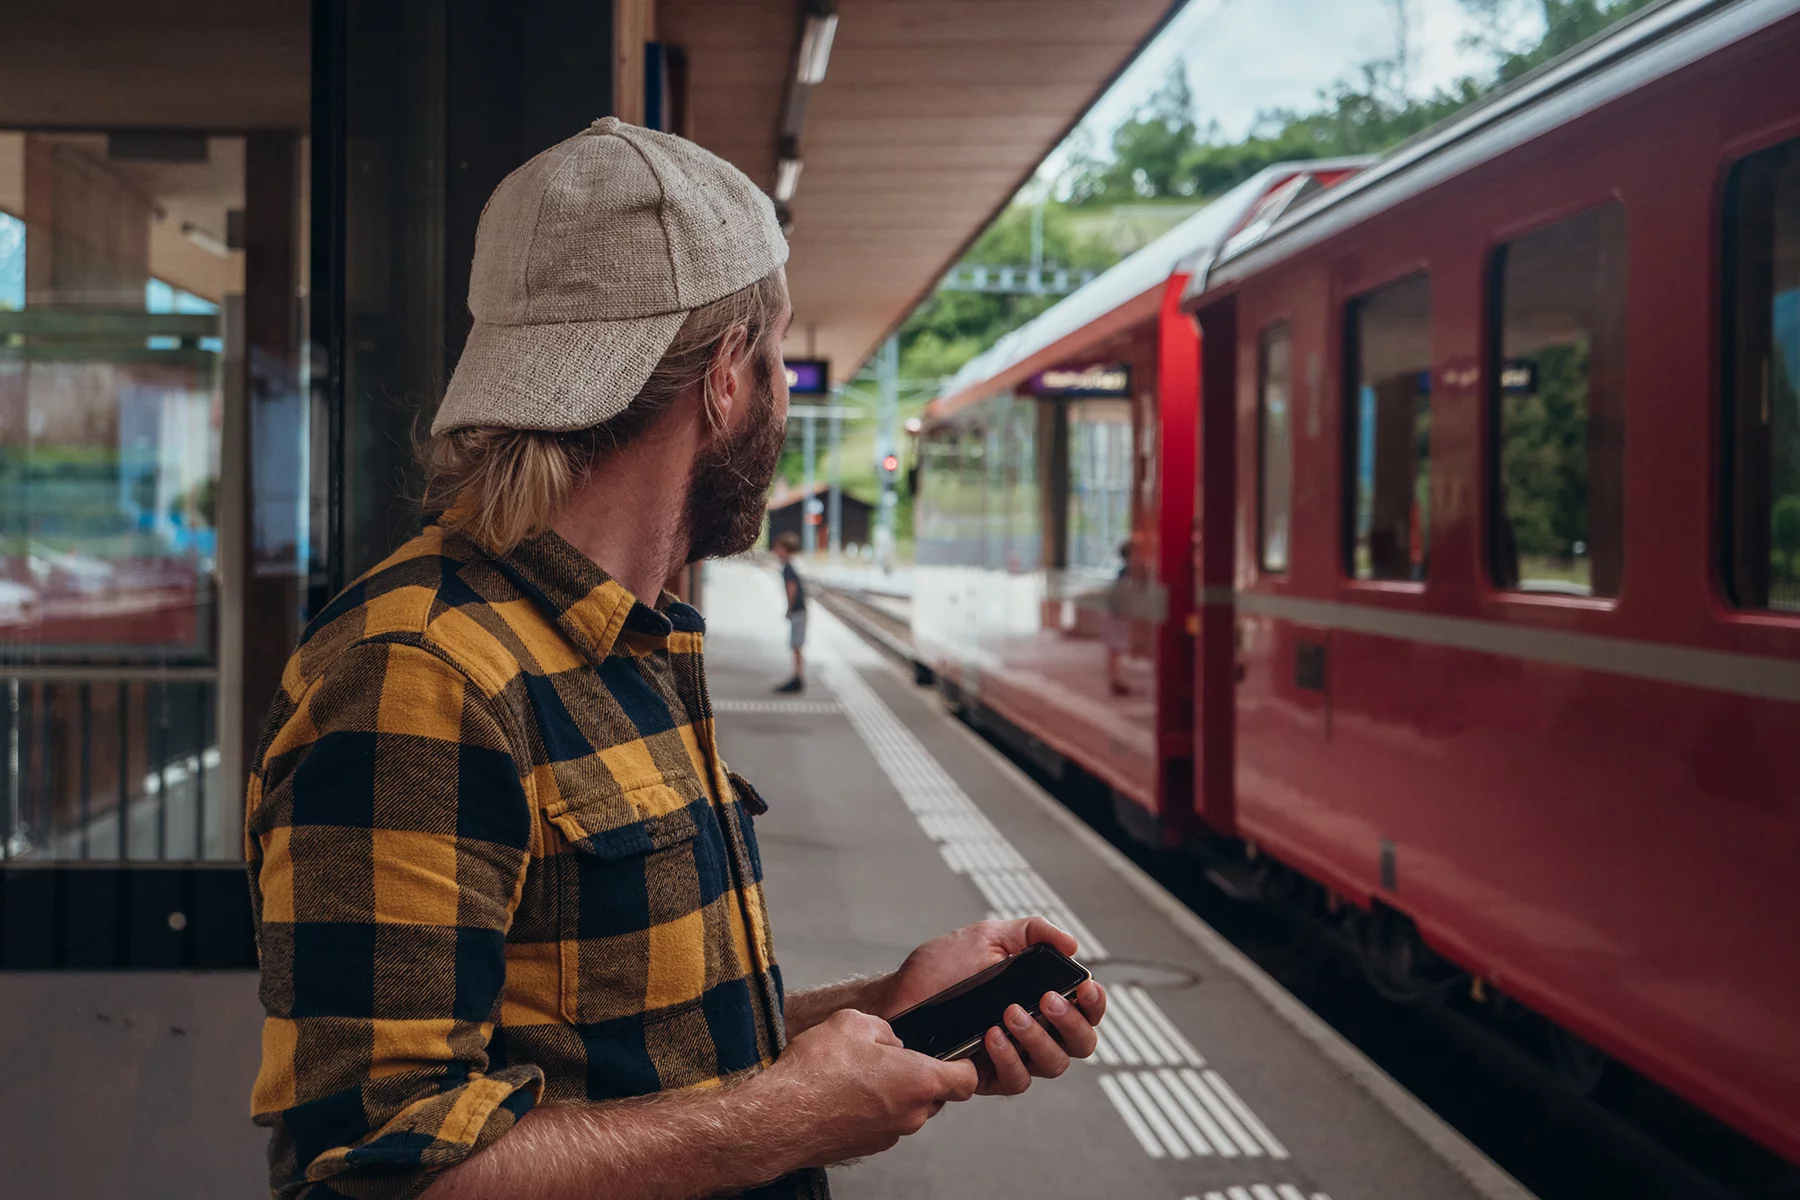 Man holding his phone on a train station platform in Switzerland